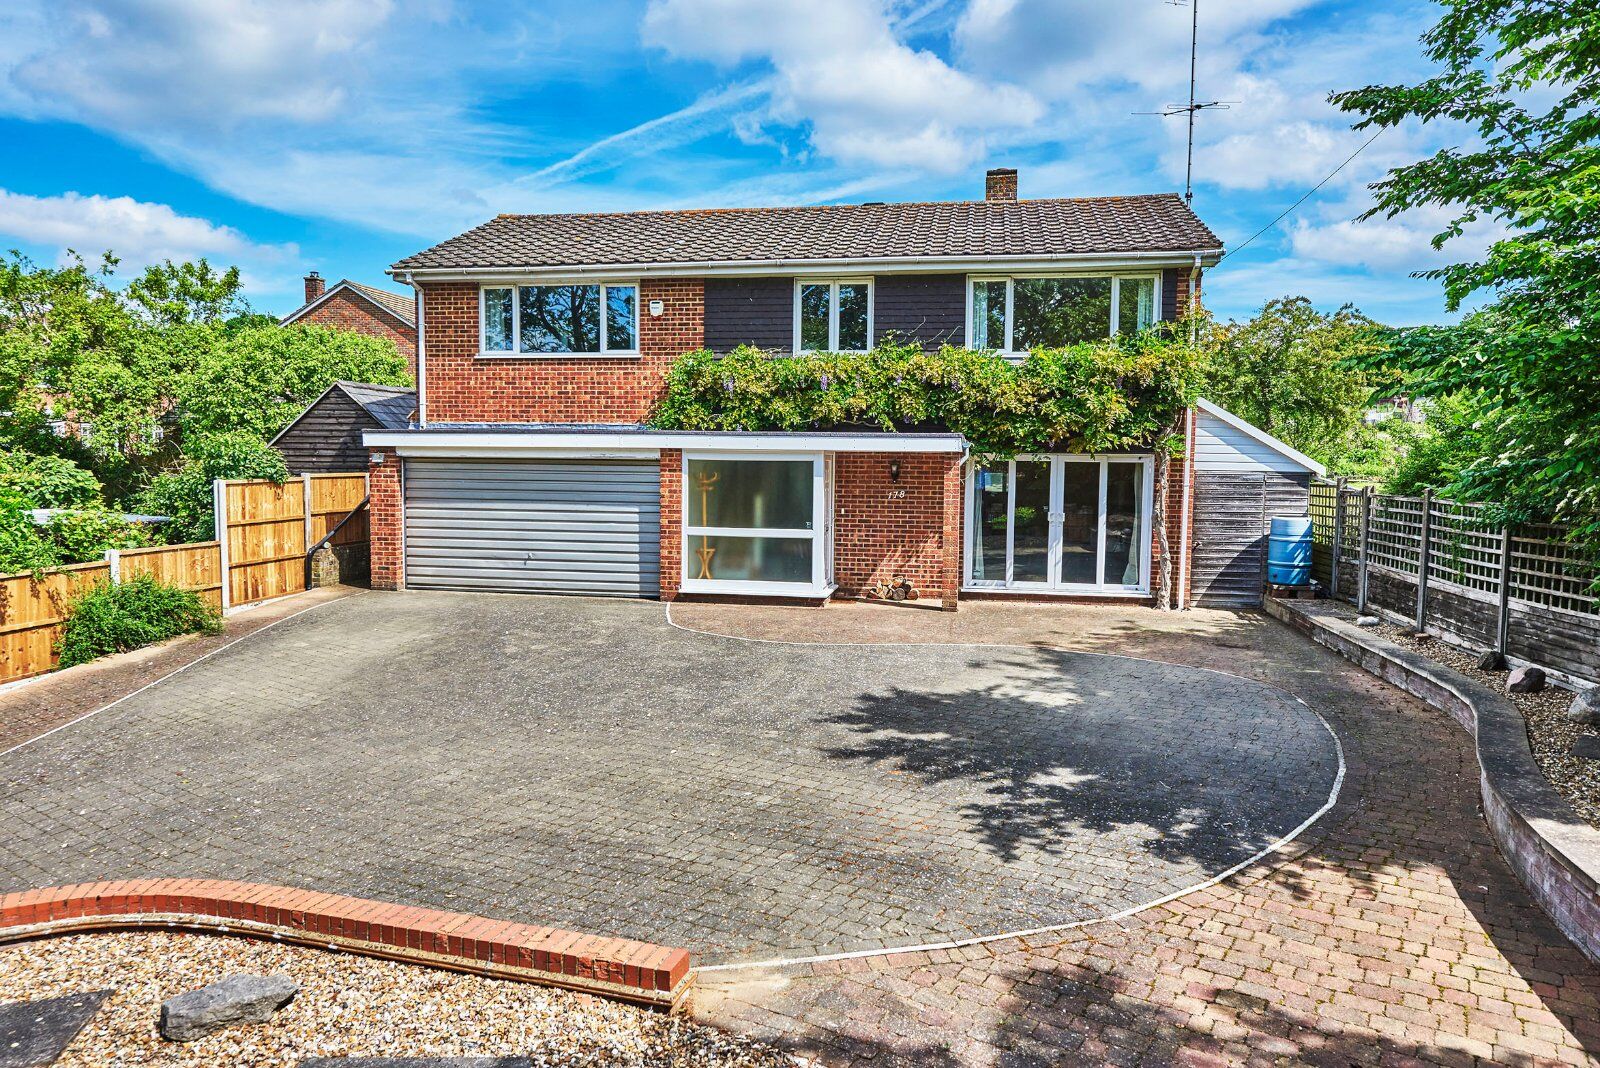 5 bedroom detached house for sale Lower Luton Road, Wheathampstead, AL4, main image